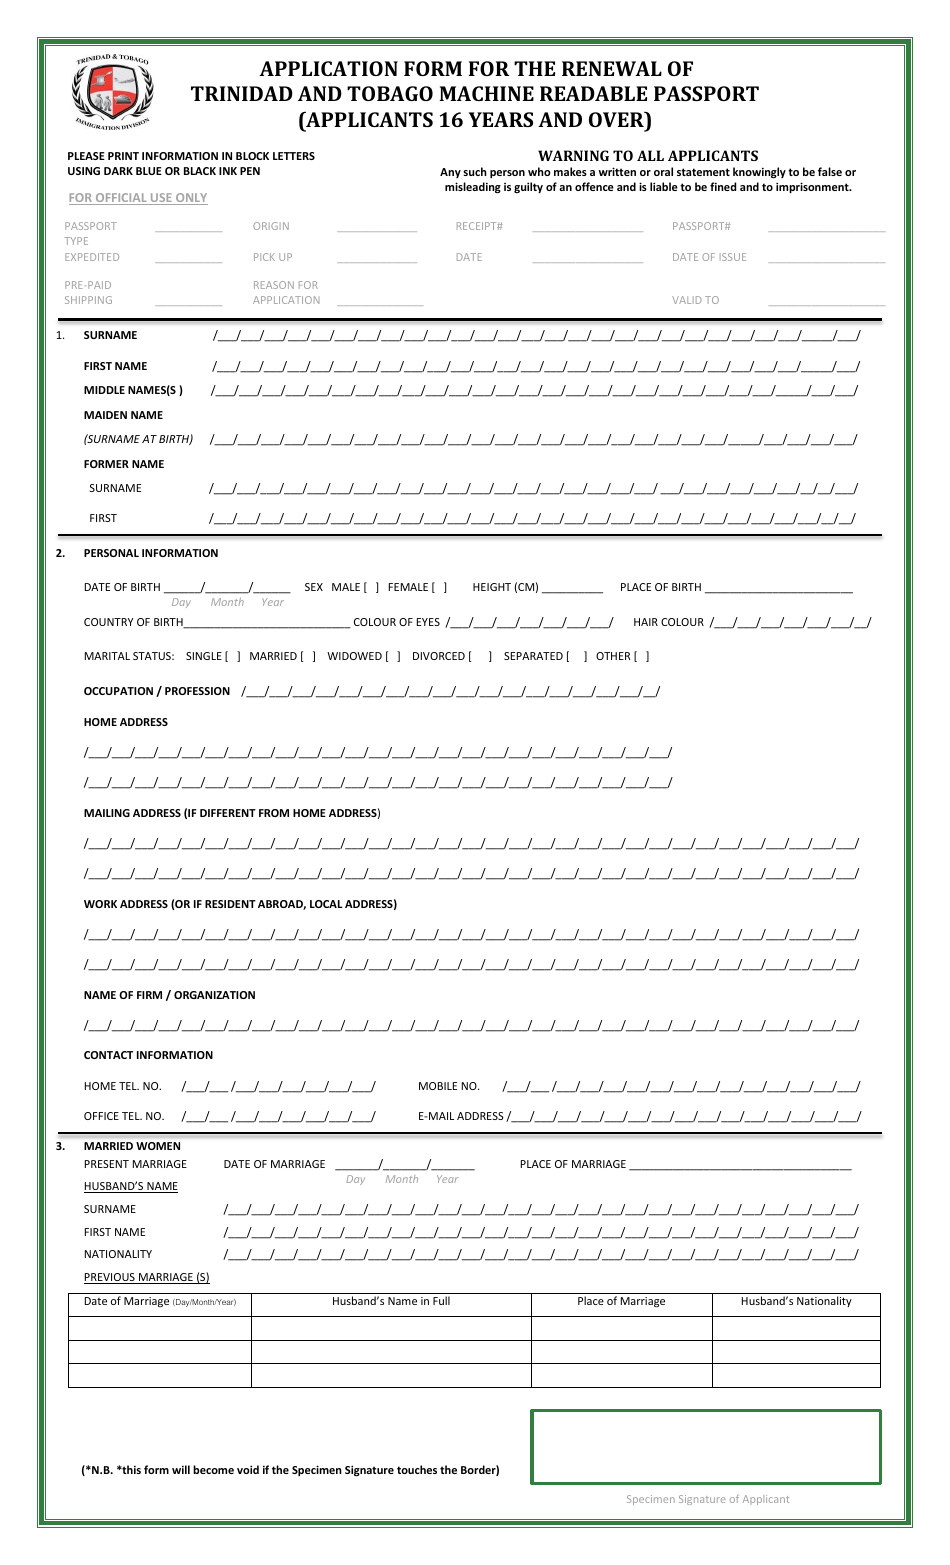 Application Form for the Renewal of Trinidad and Tobago Machine Readable Passport (Applicants 16 Years and Over) - Trinidad and Tobago, Page 1